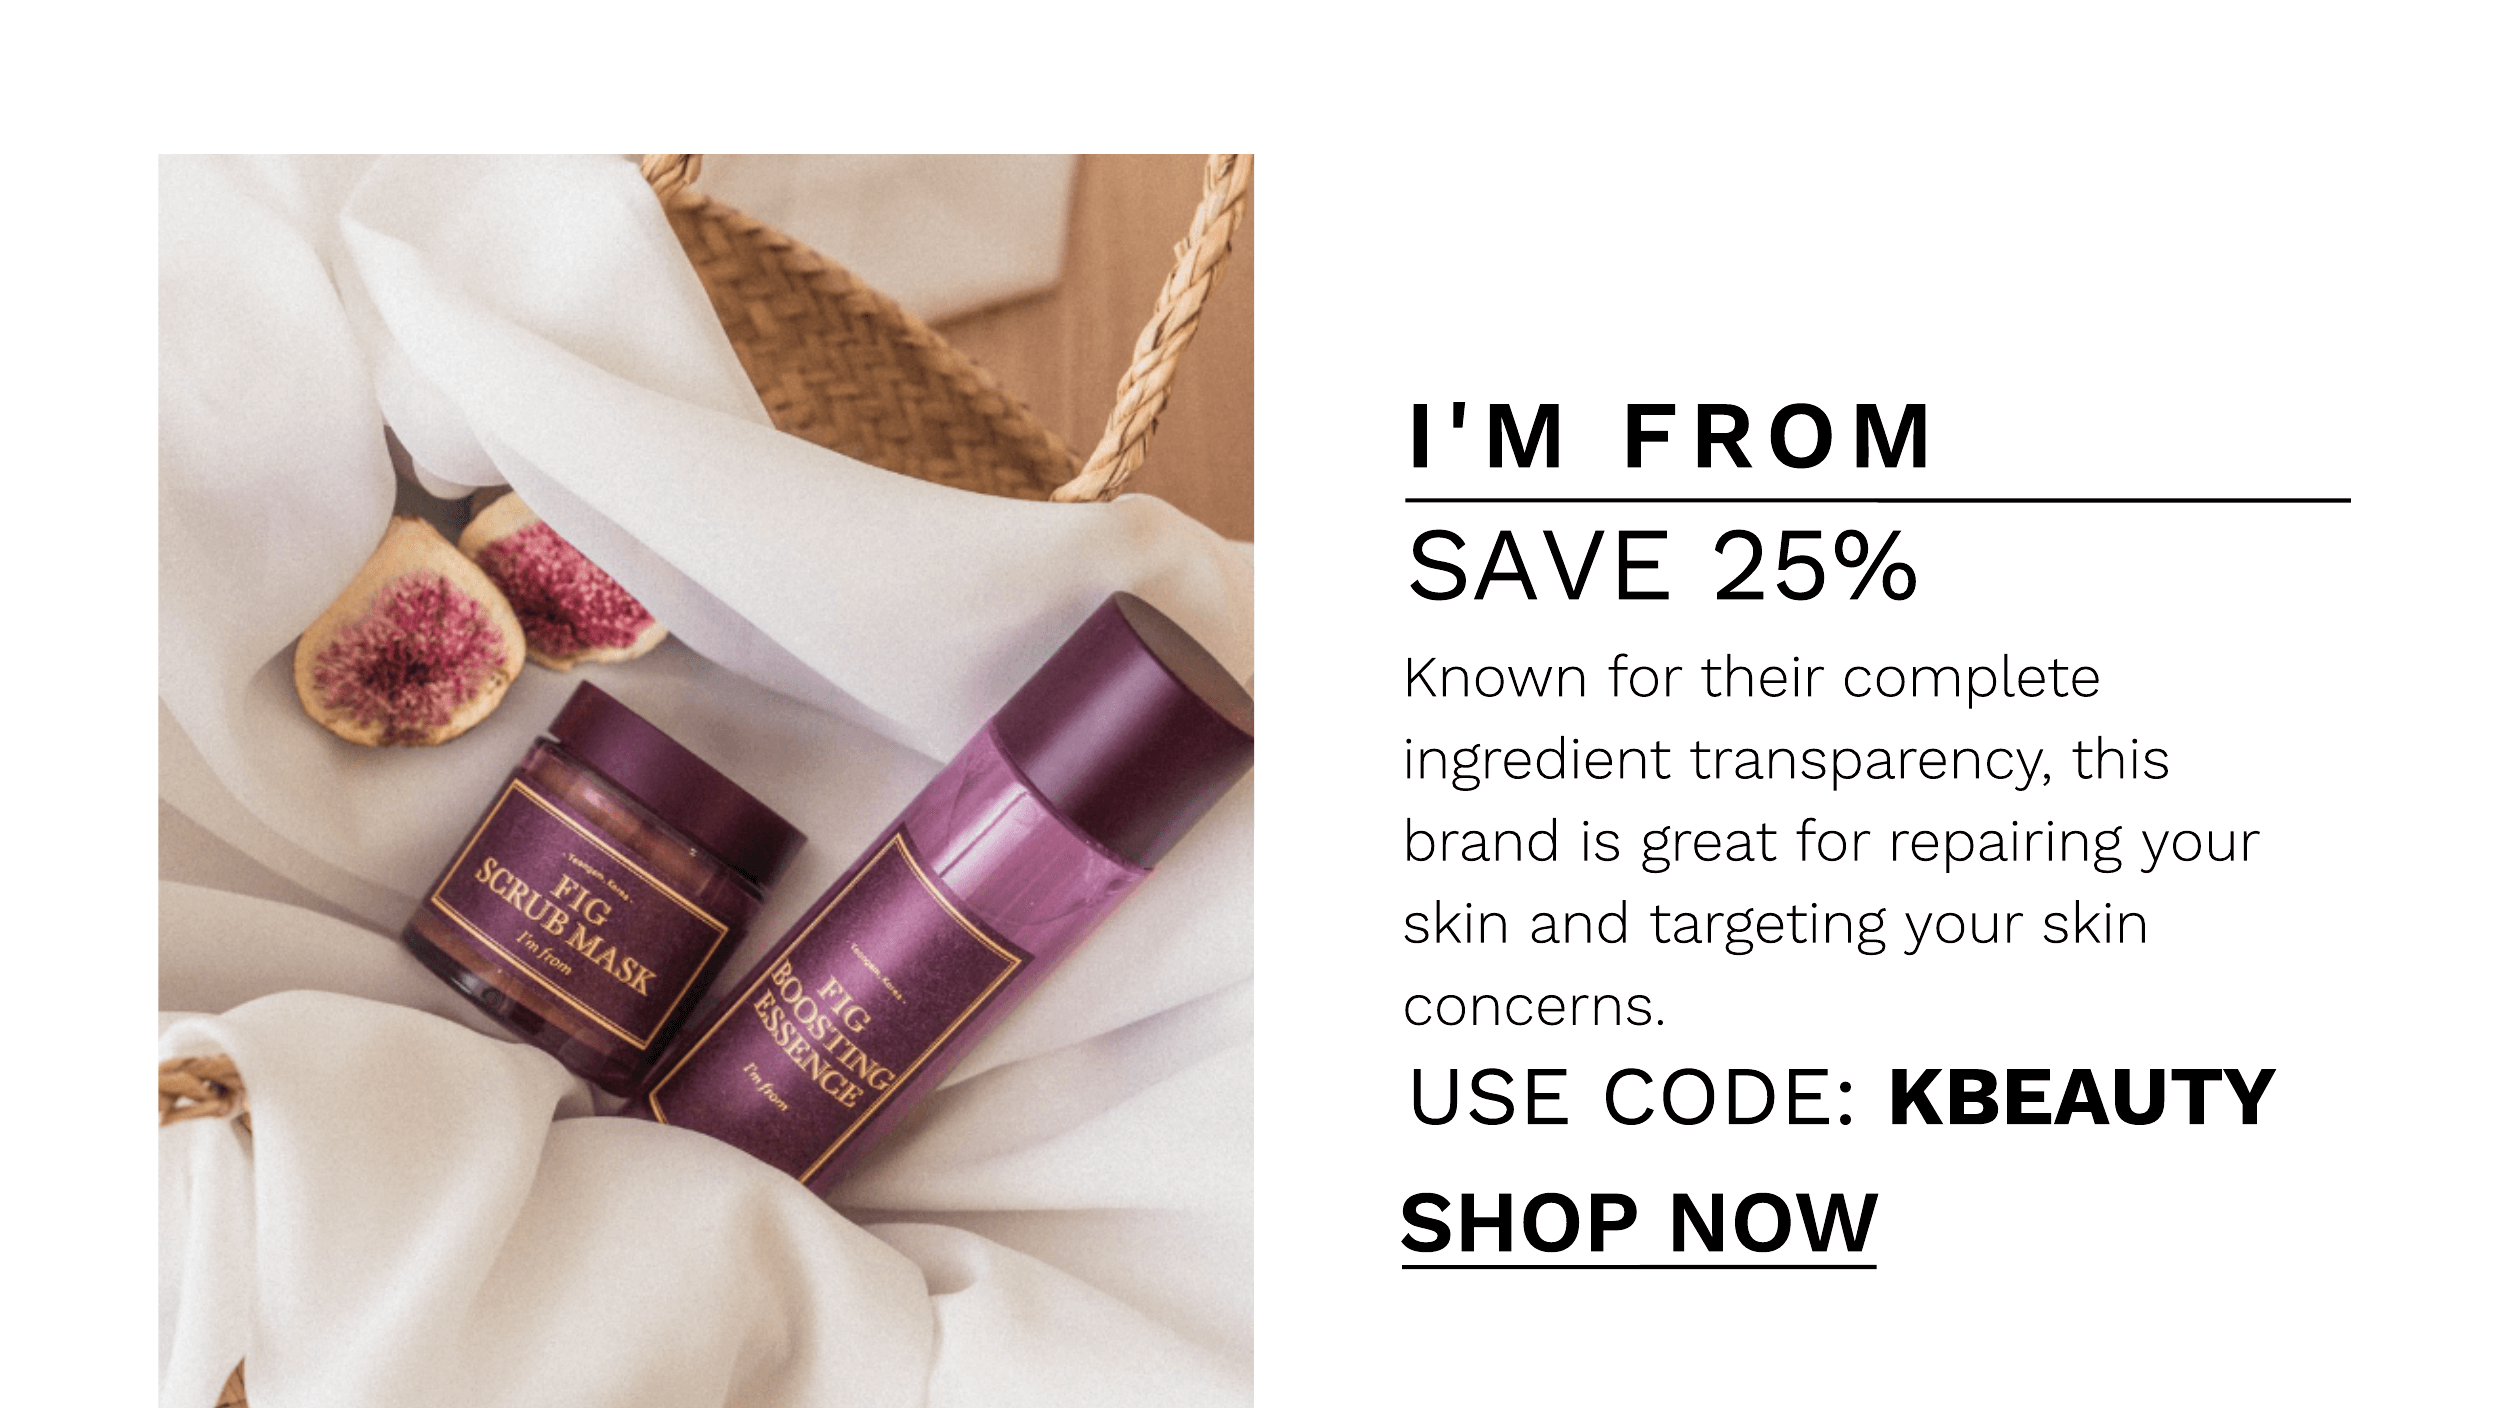 I'M FROM SAVE 25% Known for their complete ingredient transparency, this brand is great for repairing your skin and targeting your skin concerns, USE CODE: KBEAUTY SHOP NOW 